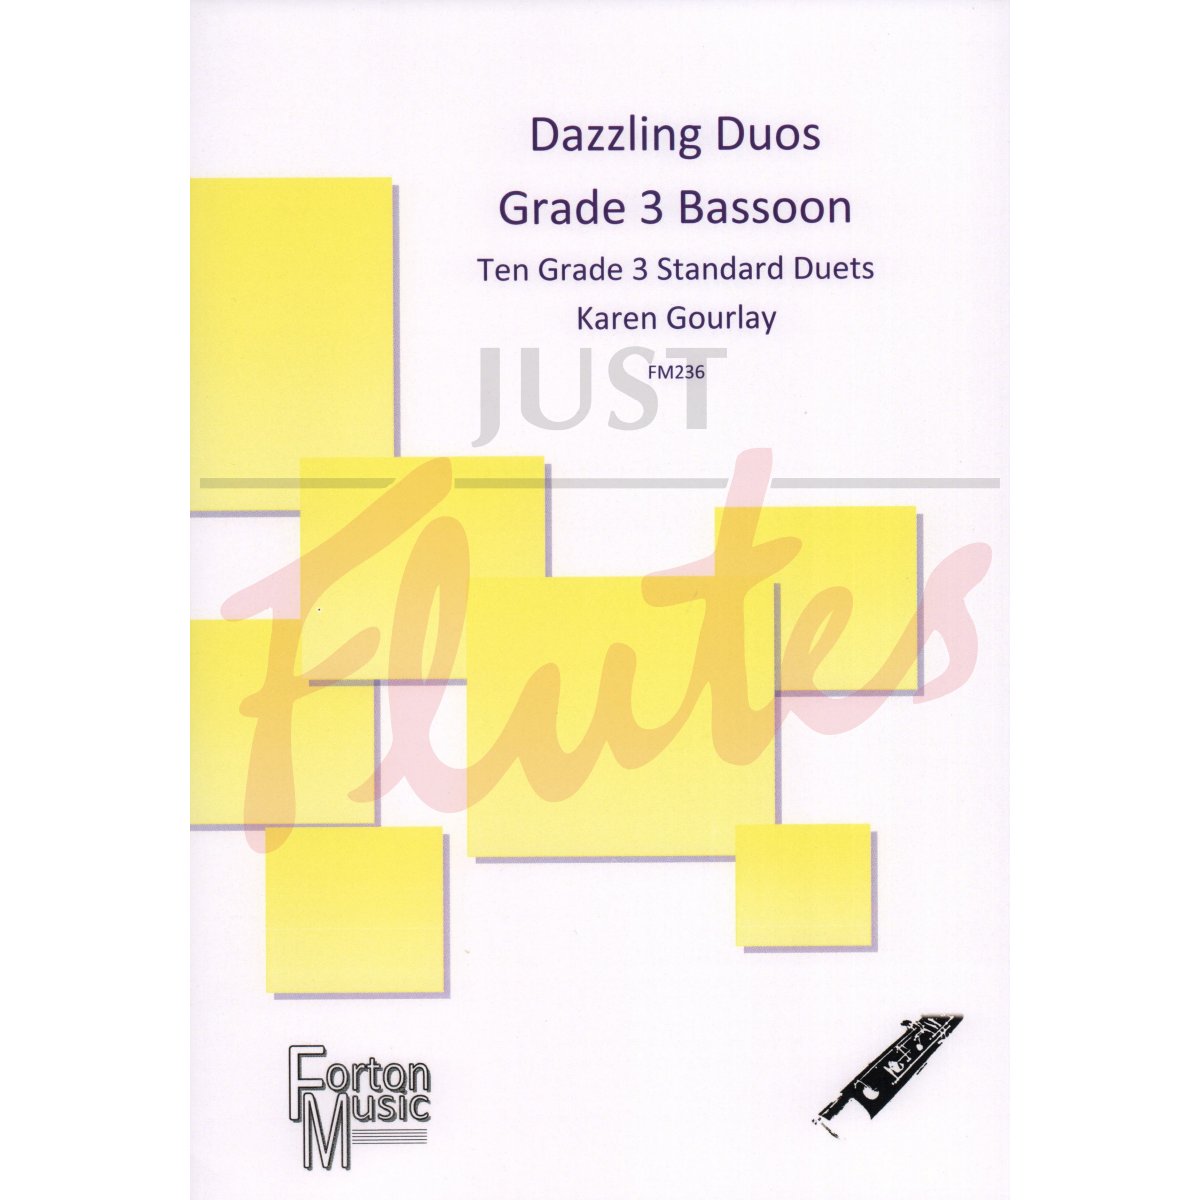 Dazzling Duos Grade 3 for Two Bassoons